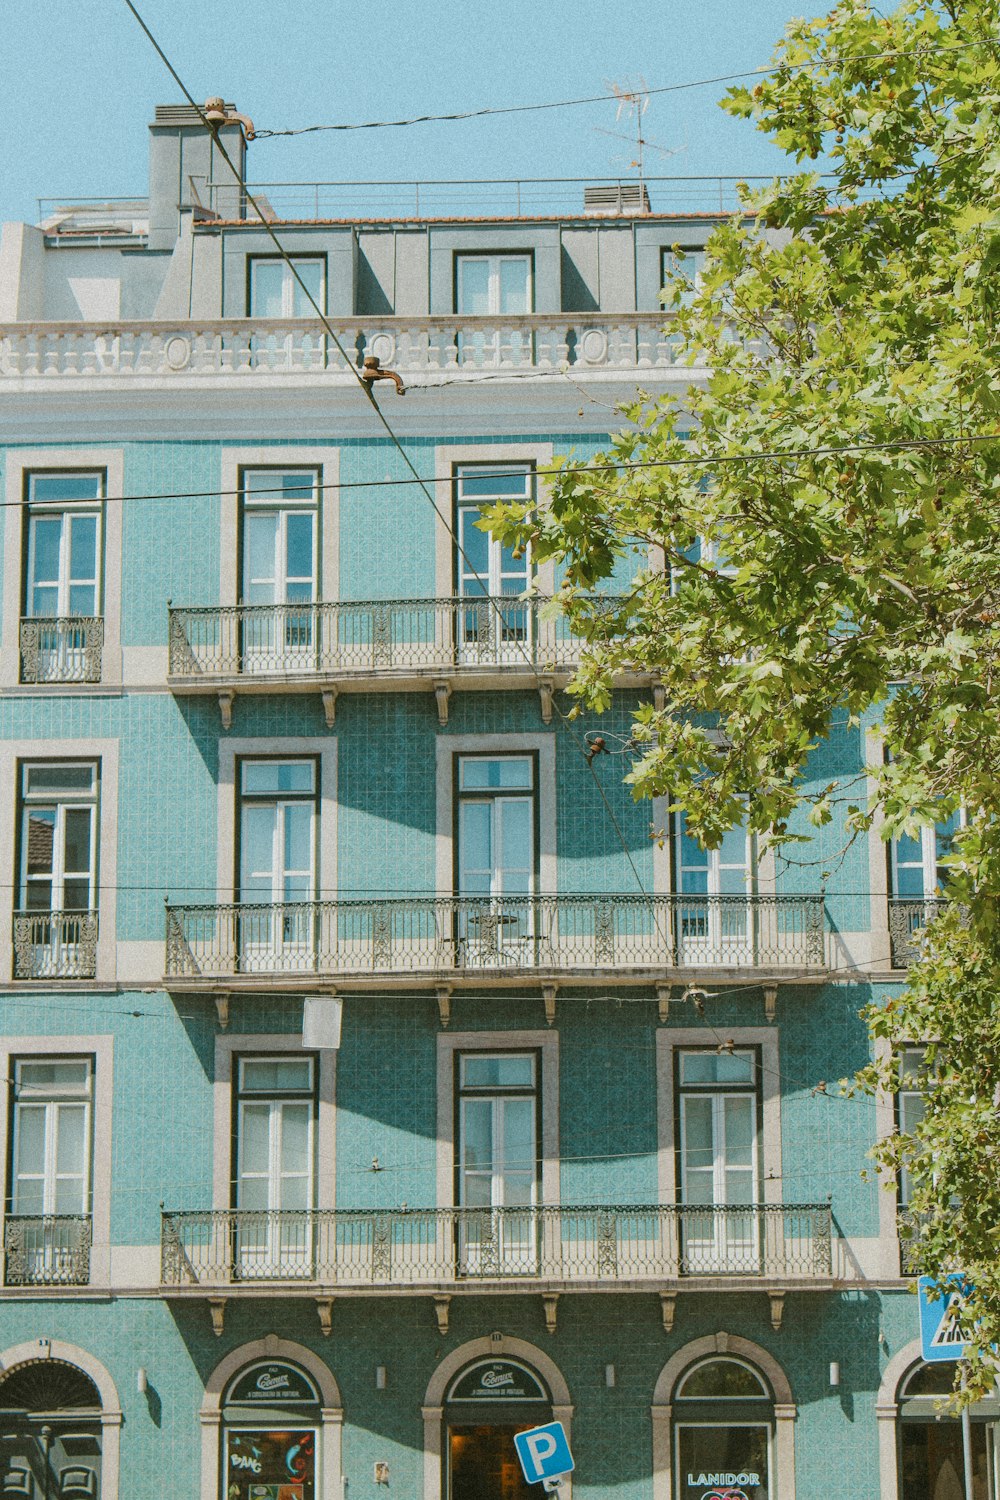 a blue building with balconies and balconies on the balconies